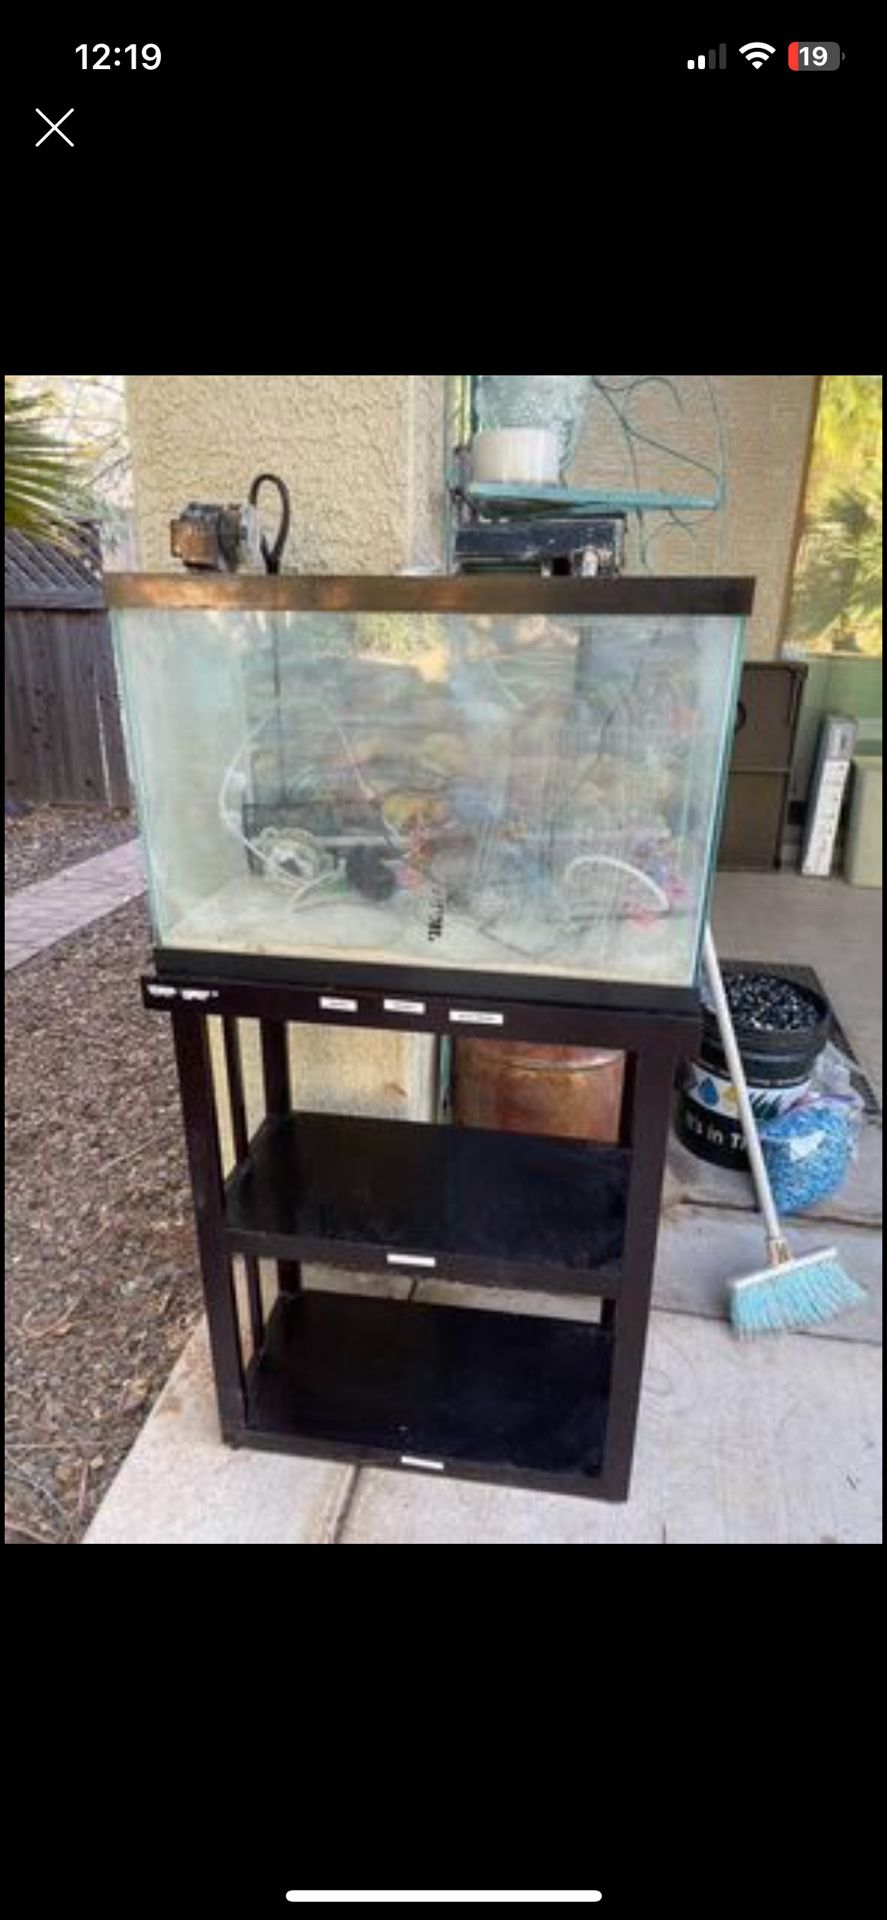 (Fully Completed) 20 Gallon Aquarium Fish Tank For Sale 